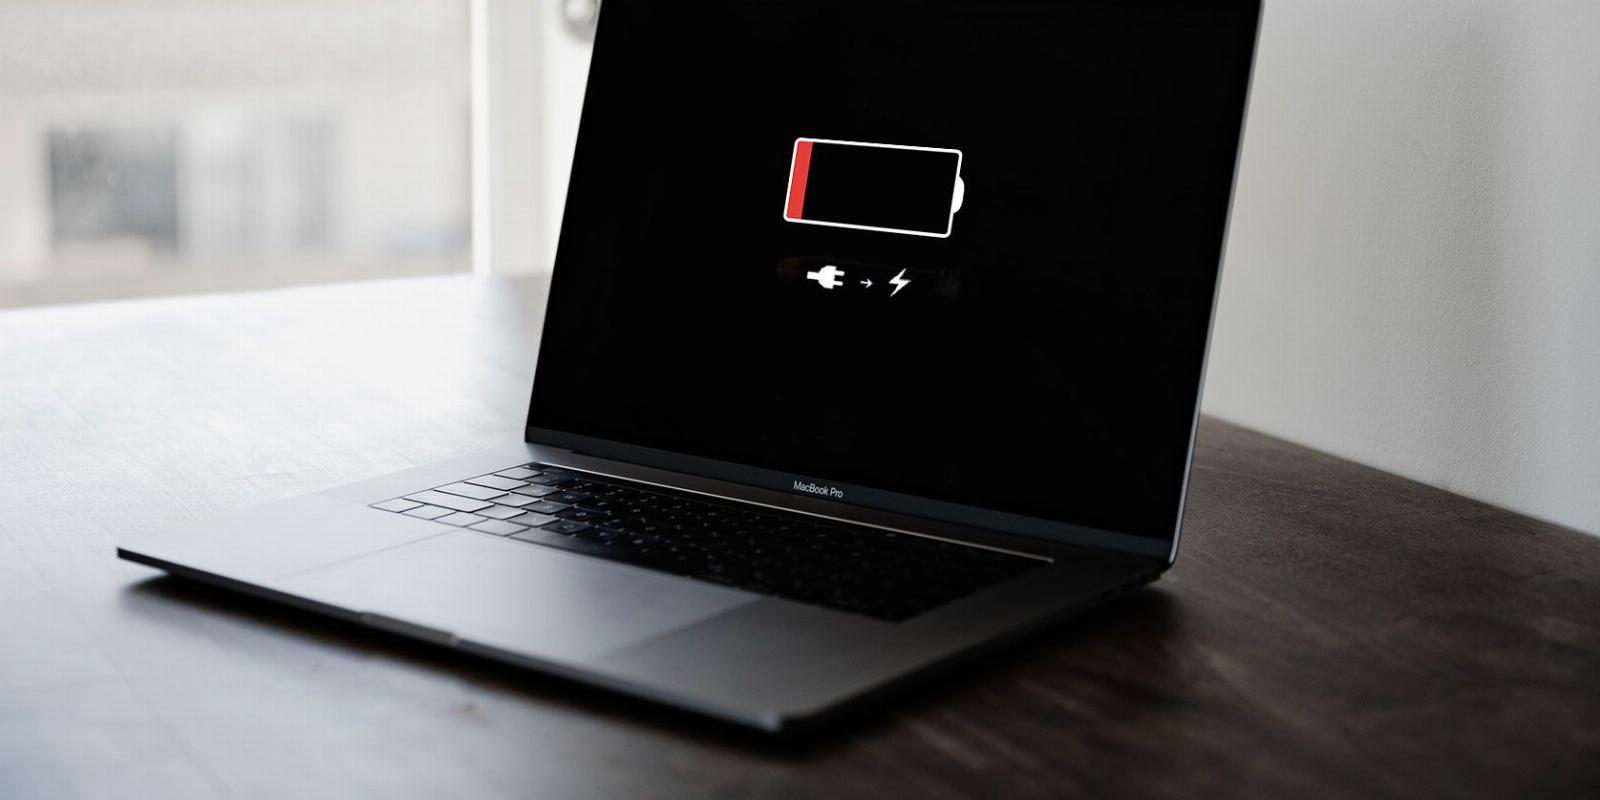 How to Identify Which Apps Are Draining Your MacBook’s Battery